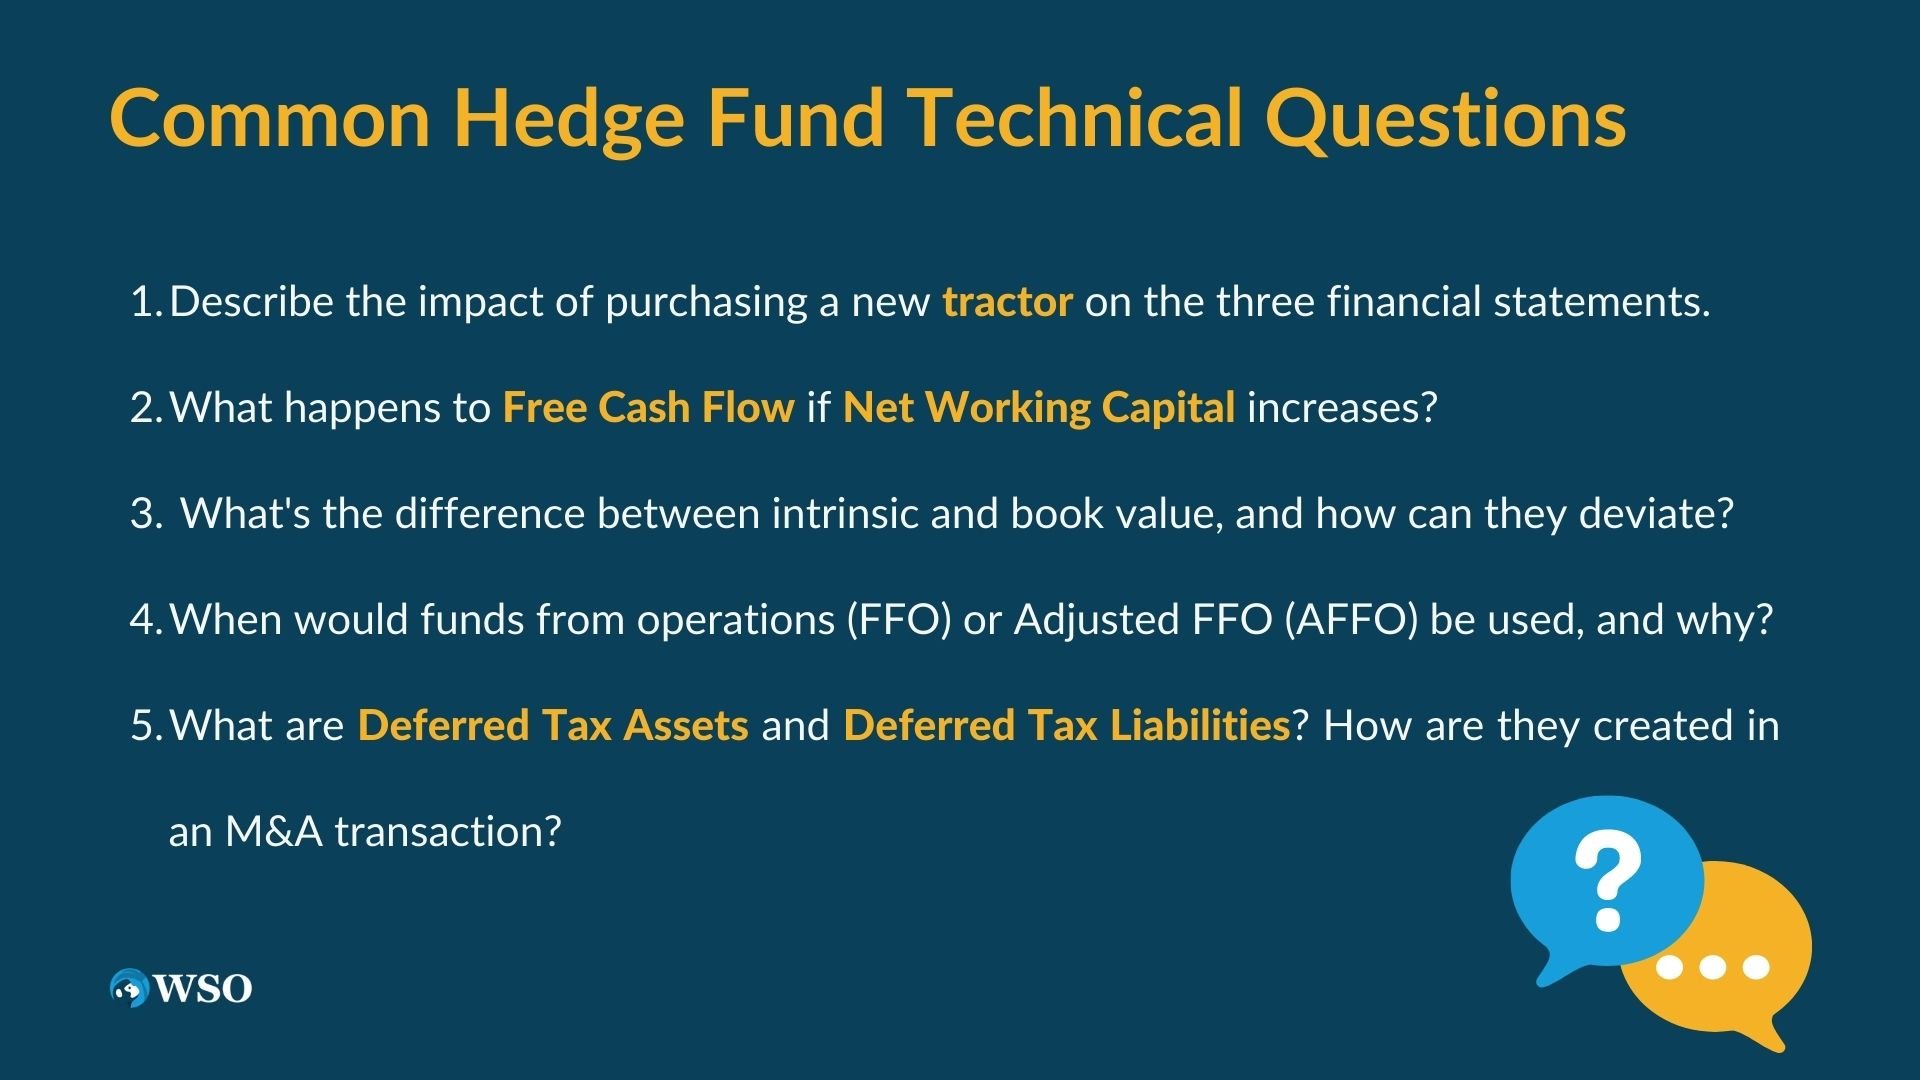 Common Hedge Fund Technical Questions